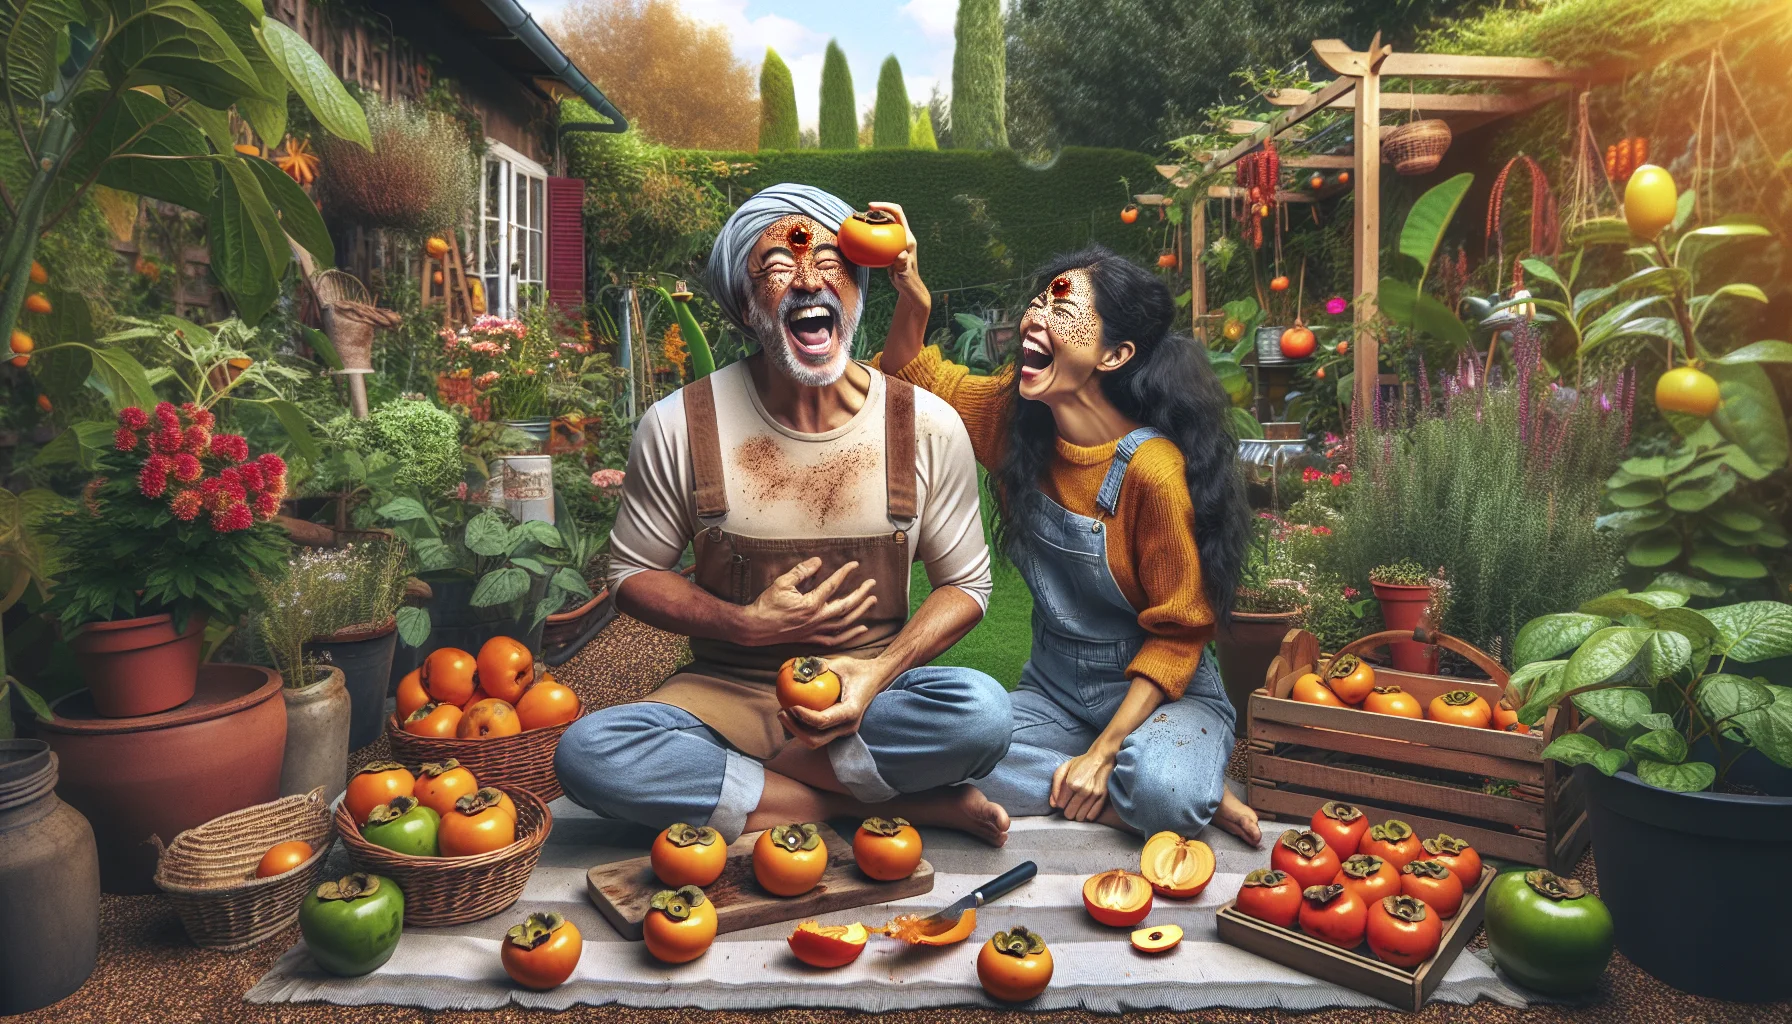 Imagine a hilarious scene happening in an idyllic backyard garden. A South Asian man and a Middle-Eastern woman are in the garden, laughing heartily while partaking in the kooky task of eating juicy, ripe persimmons. The man has a persimmon half stuck to his forehead, pretending it's a third eye, while the woman has bitten into a persimmon and has juice splattering all over her face like a freckled pattern. Around them, lush plants, blooming flowers, and distinctly charming garden accessories emphasize the rewarding experience of gardening. The scene should exude an infectious joy that invites viewers to try gardening for fun and fresh produce.